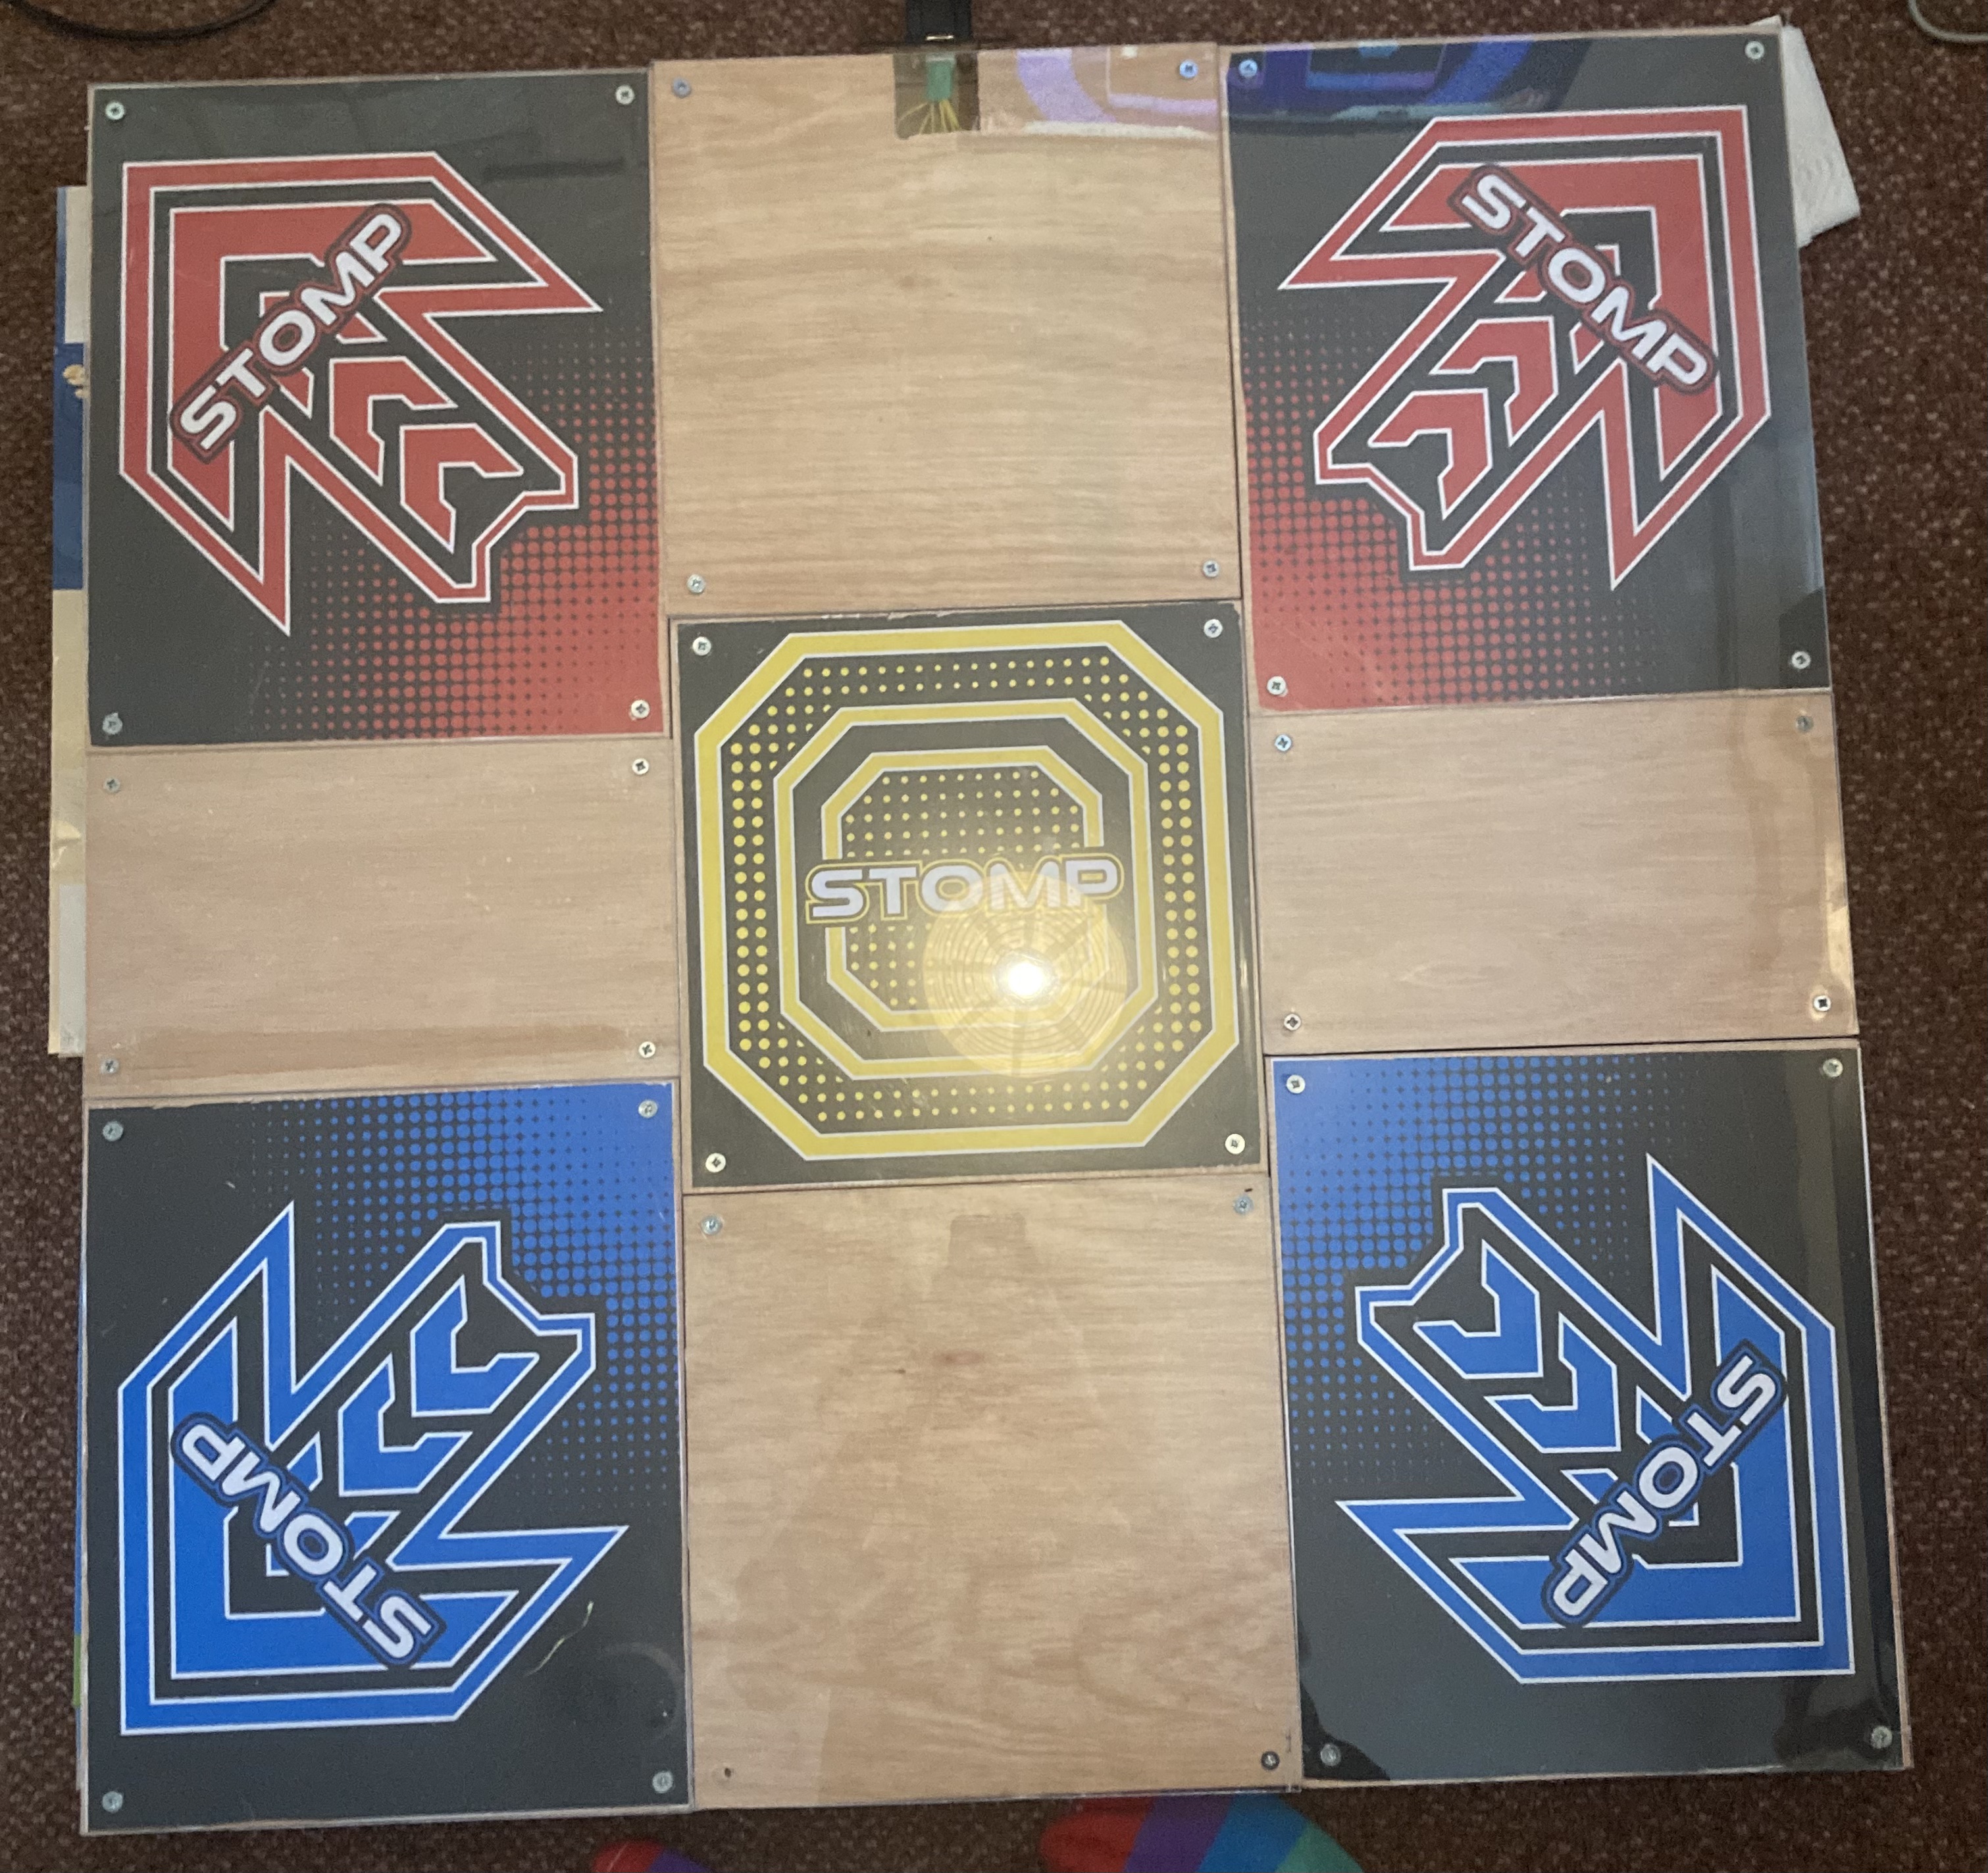 a completed DIY Dance pad